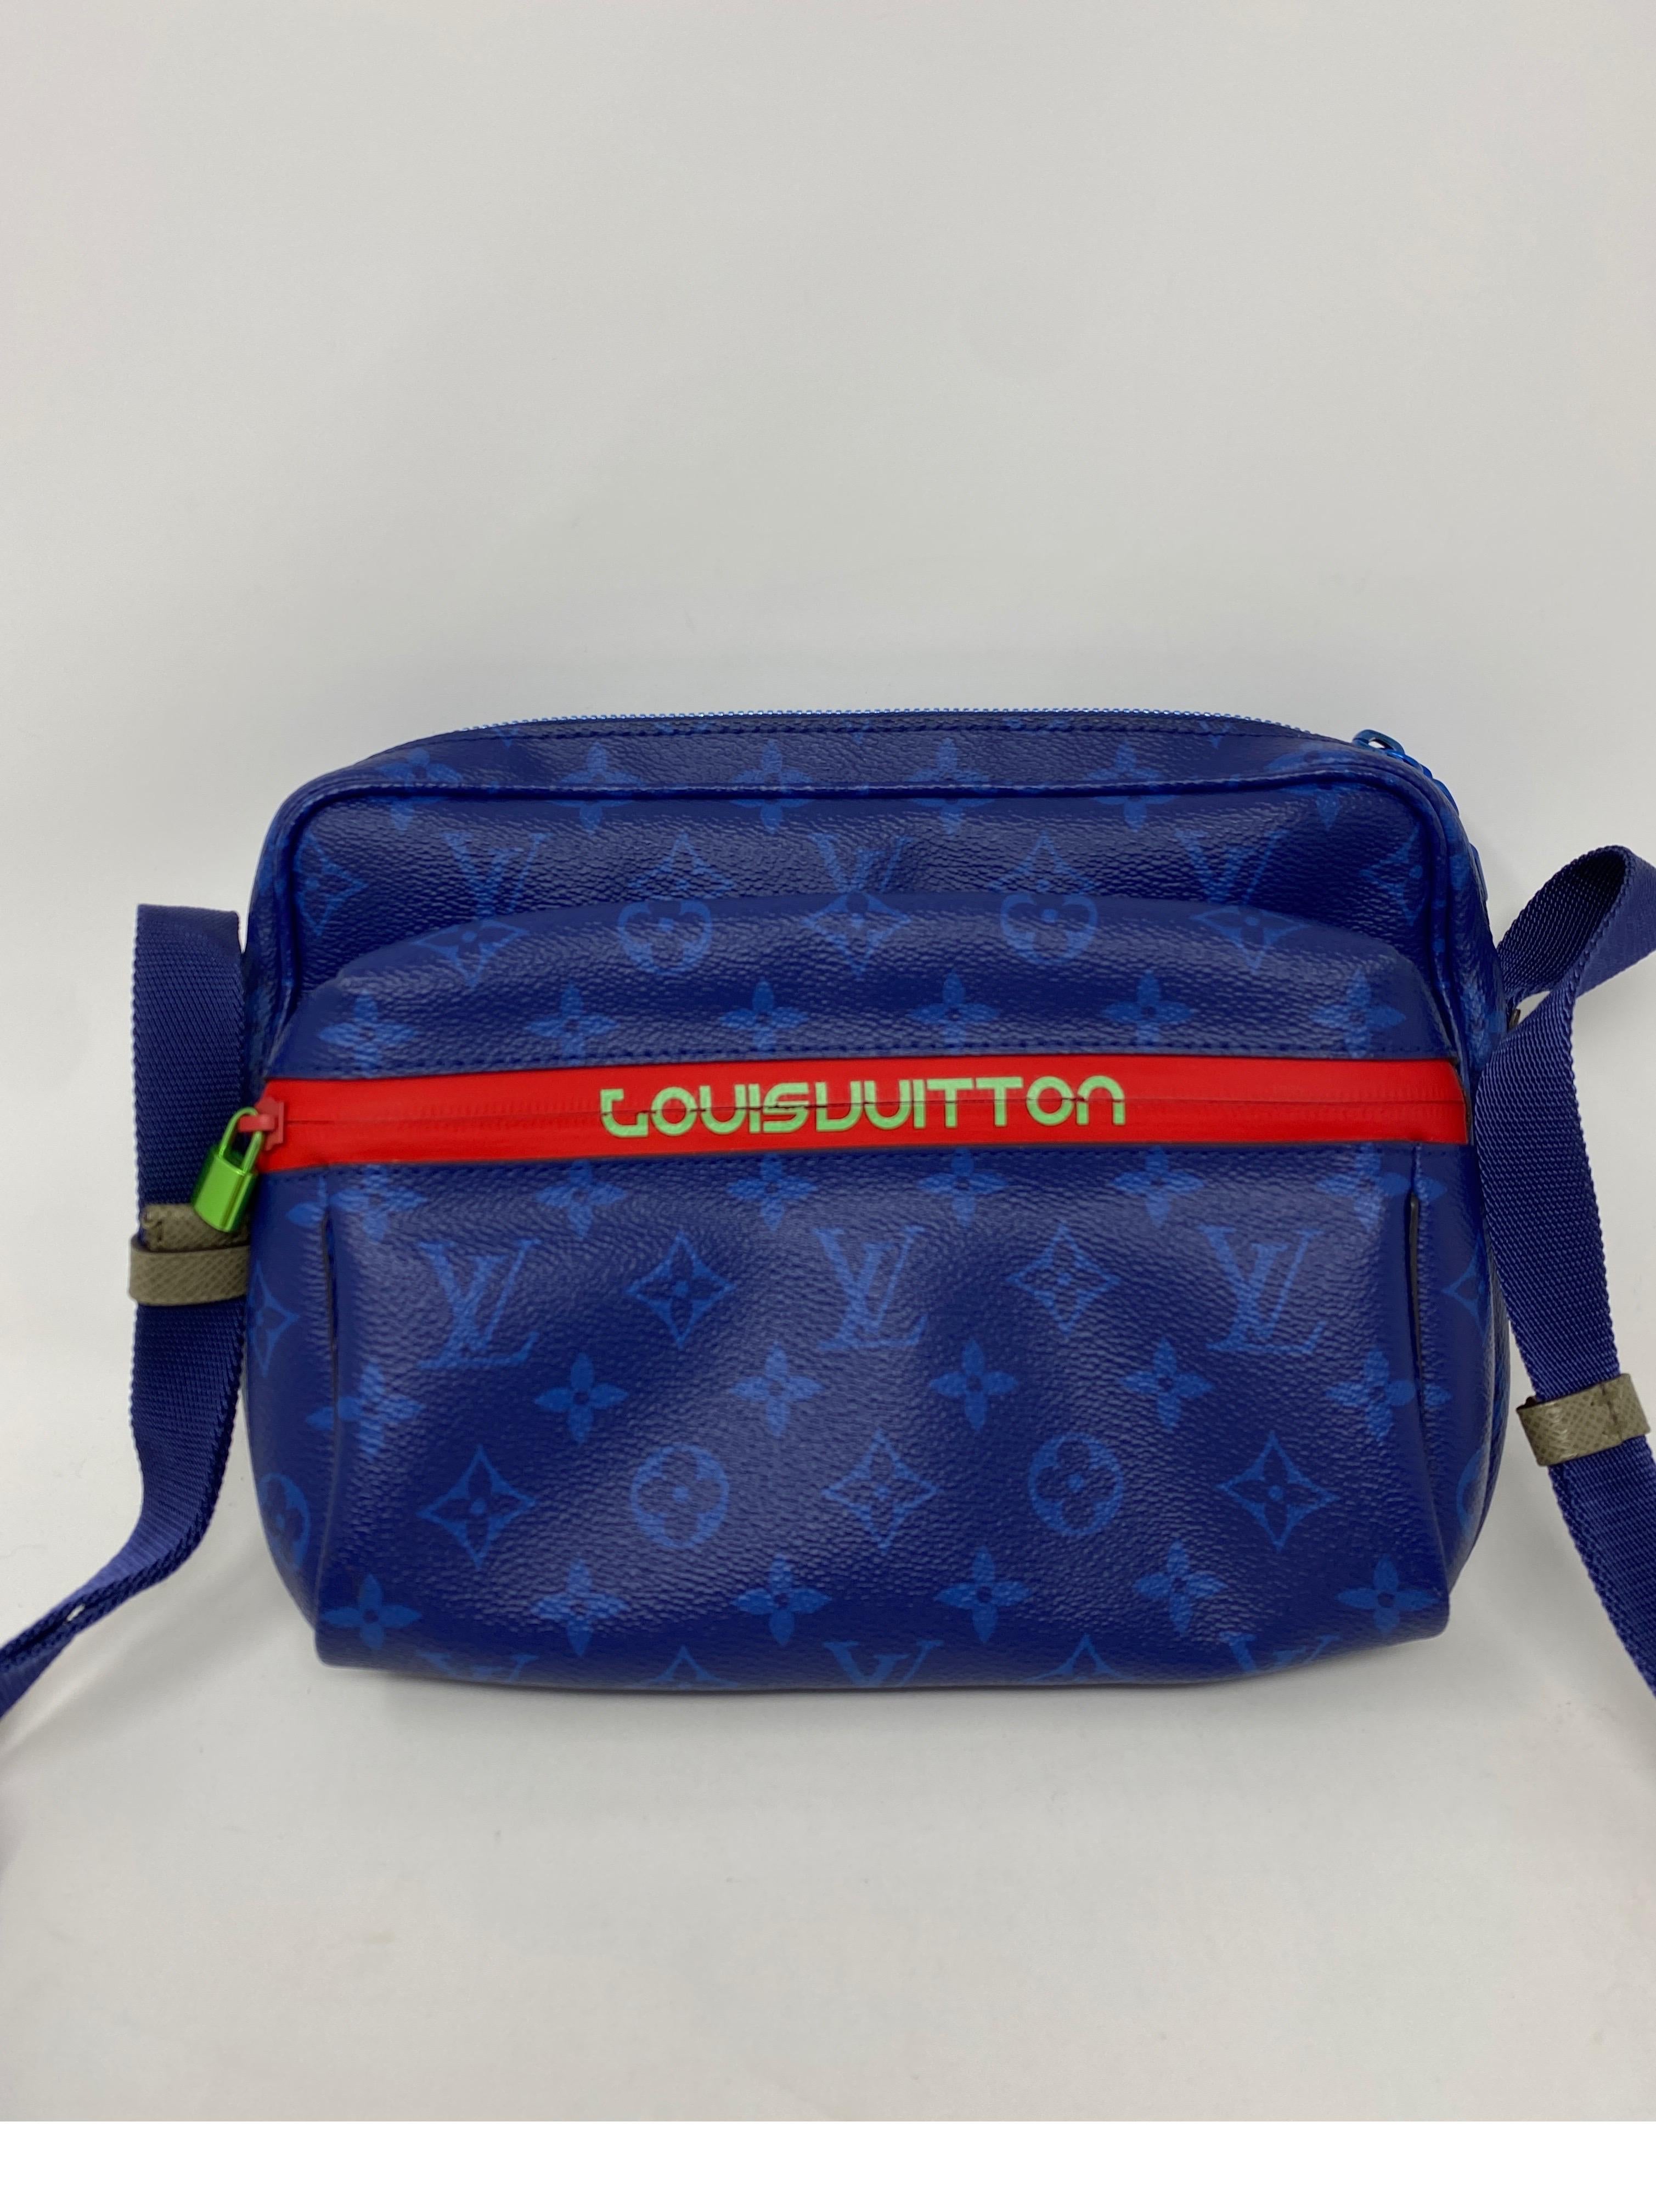 Louis Vuitton Blue Taigarama Monogram Outdoor Messenger Bag. Rare and limited bag. Excellent condition. From 2018 Collection. Adjustable strap can be worn crossbody or shorter. Guaranteed authentic. 